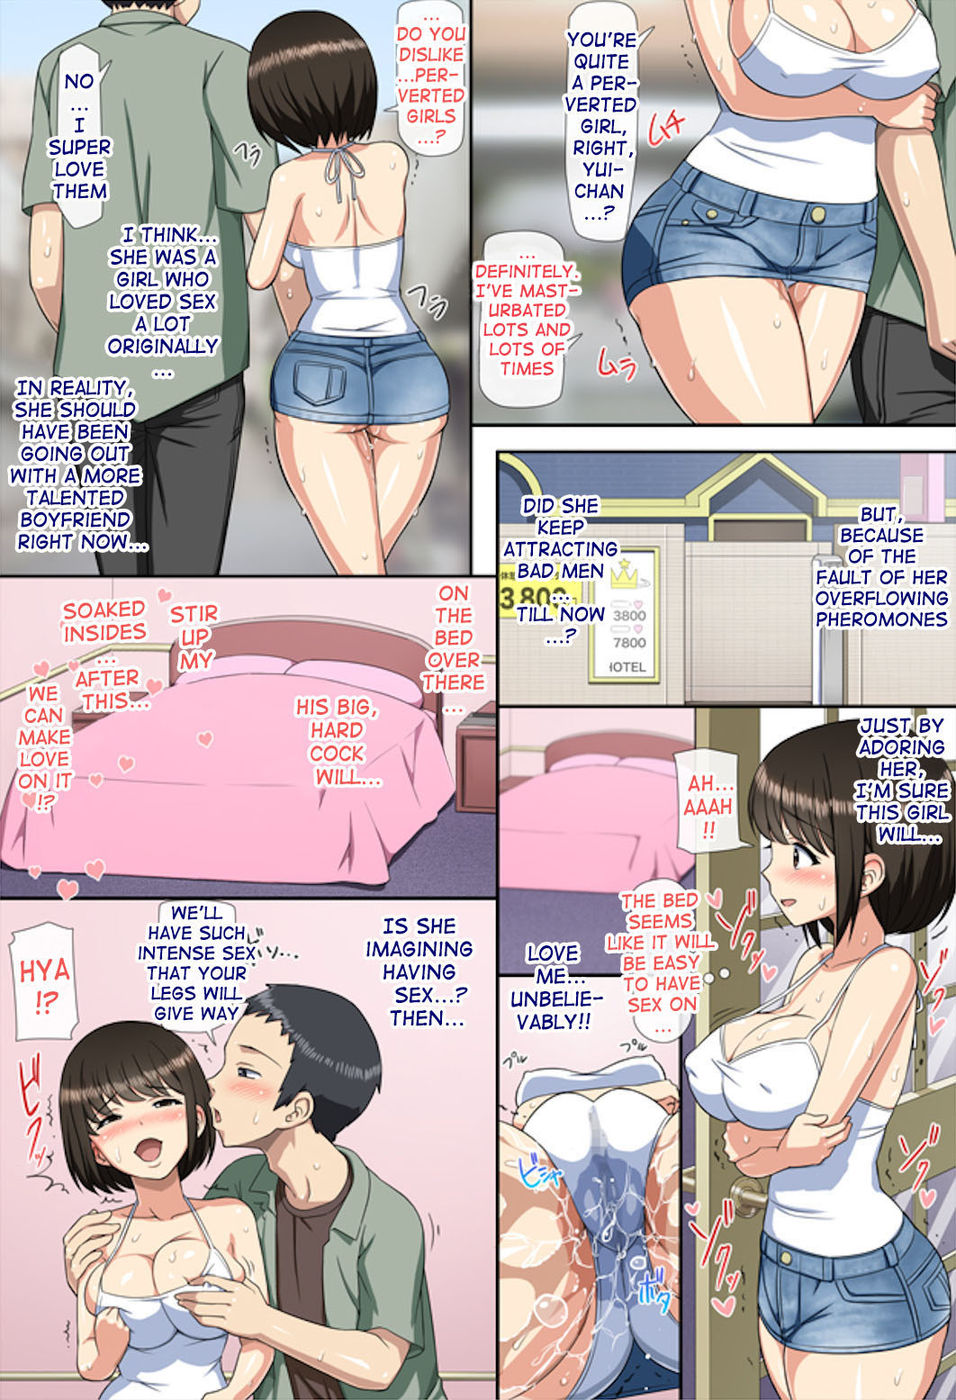 Hentai Manga Comic-The Schoolgirl Who Was Groped, and the Perverted Love They Shared Afterwards-Read-26